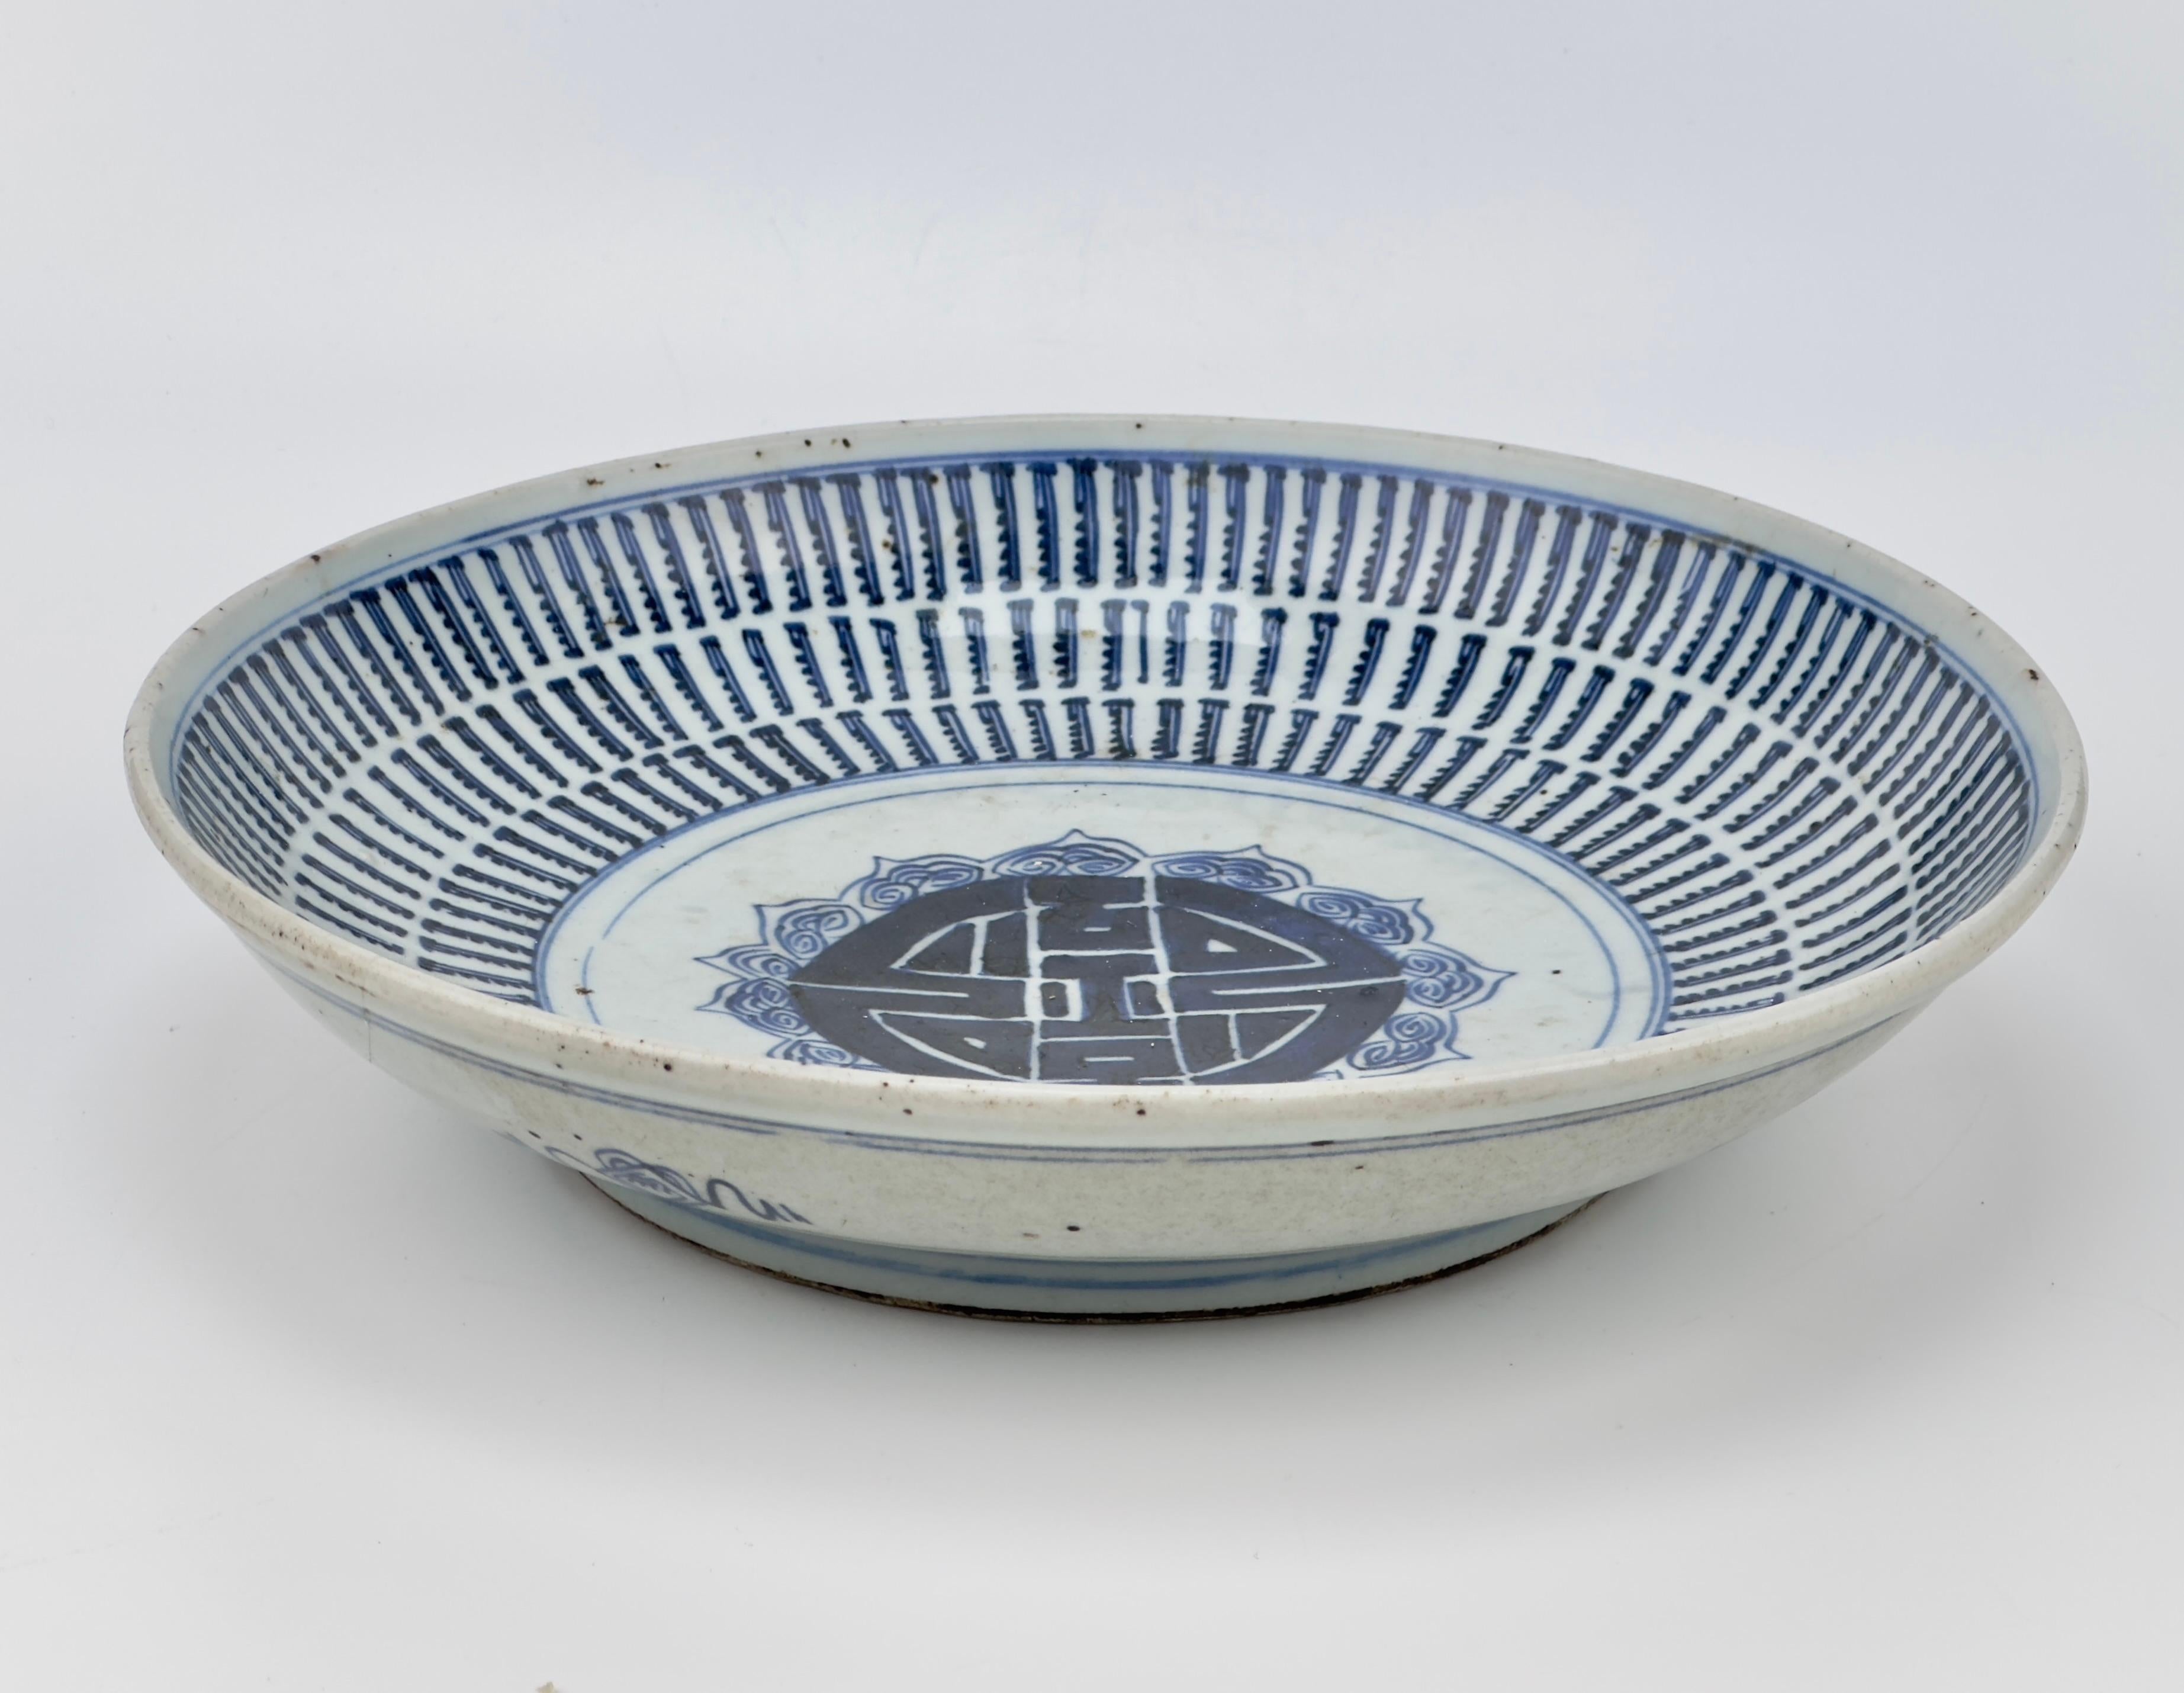 The dish features underglaze cobalt blue decoration, showcasing the Chinese character 